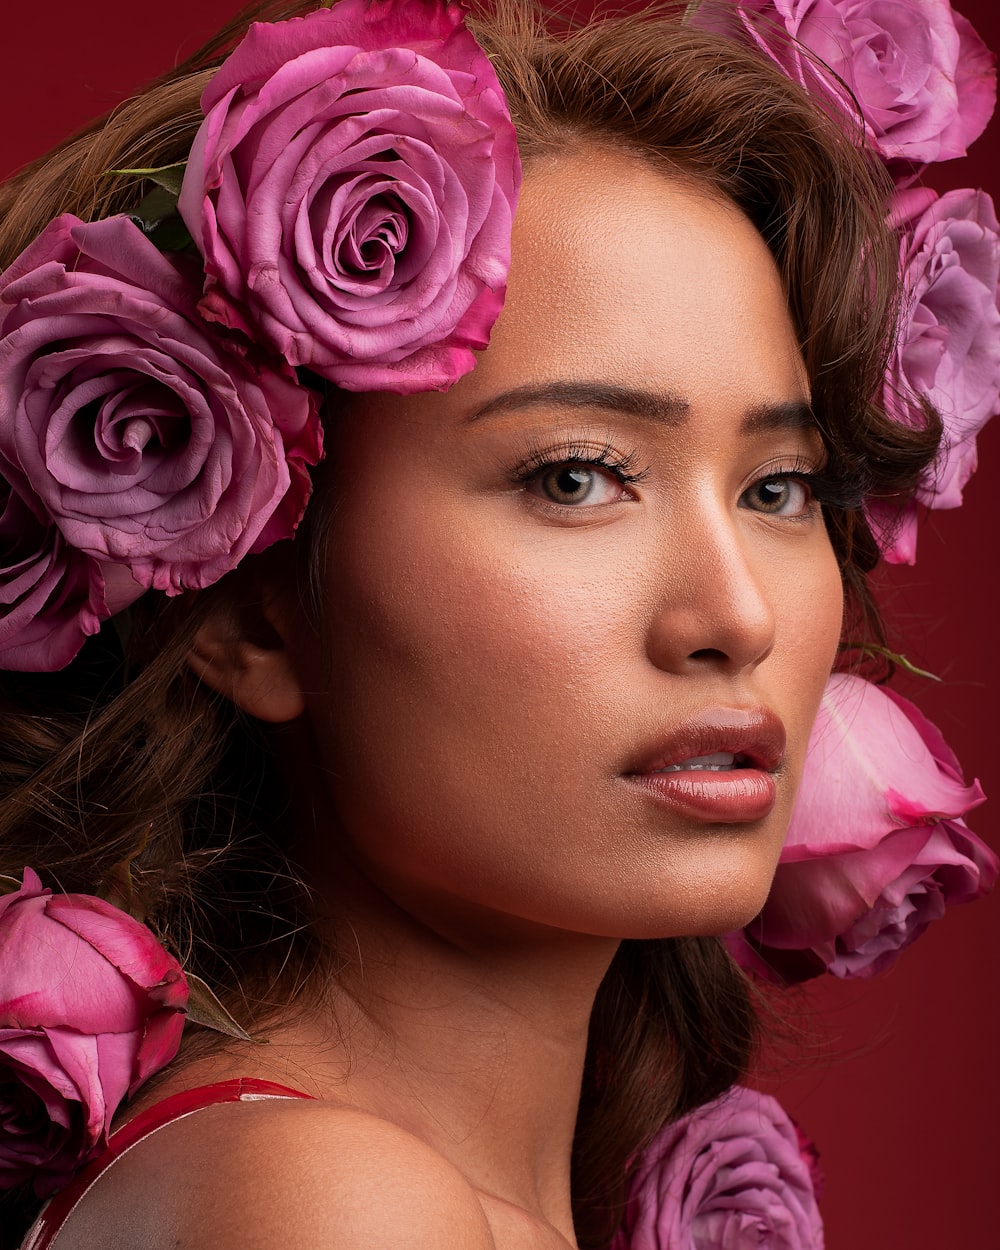 portrait photography of woman wearing red spaghetti strap top with purple rose flowers on hair